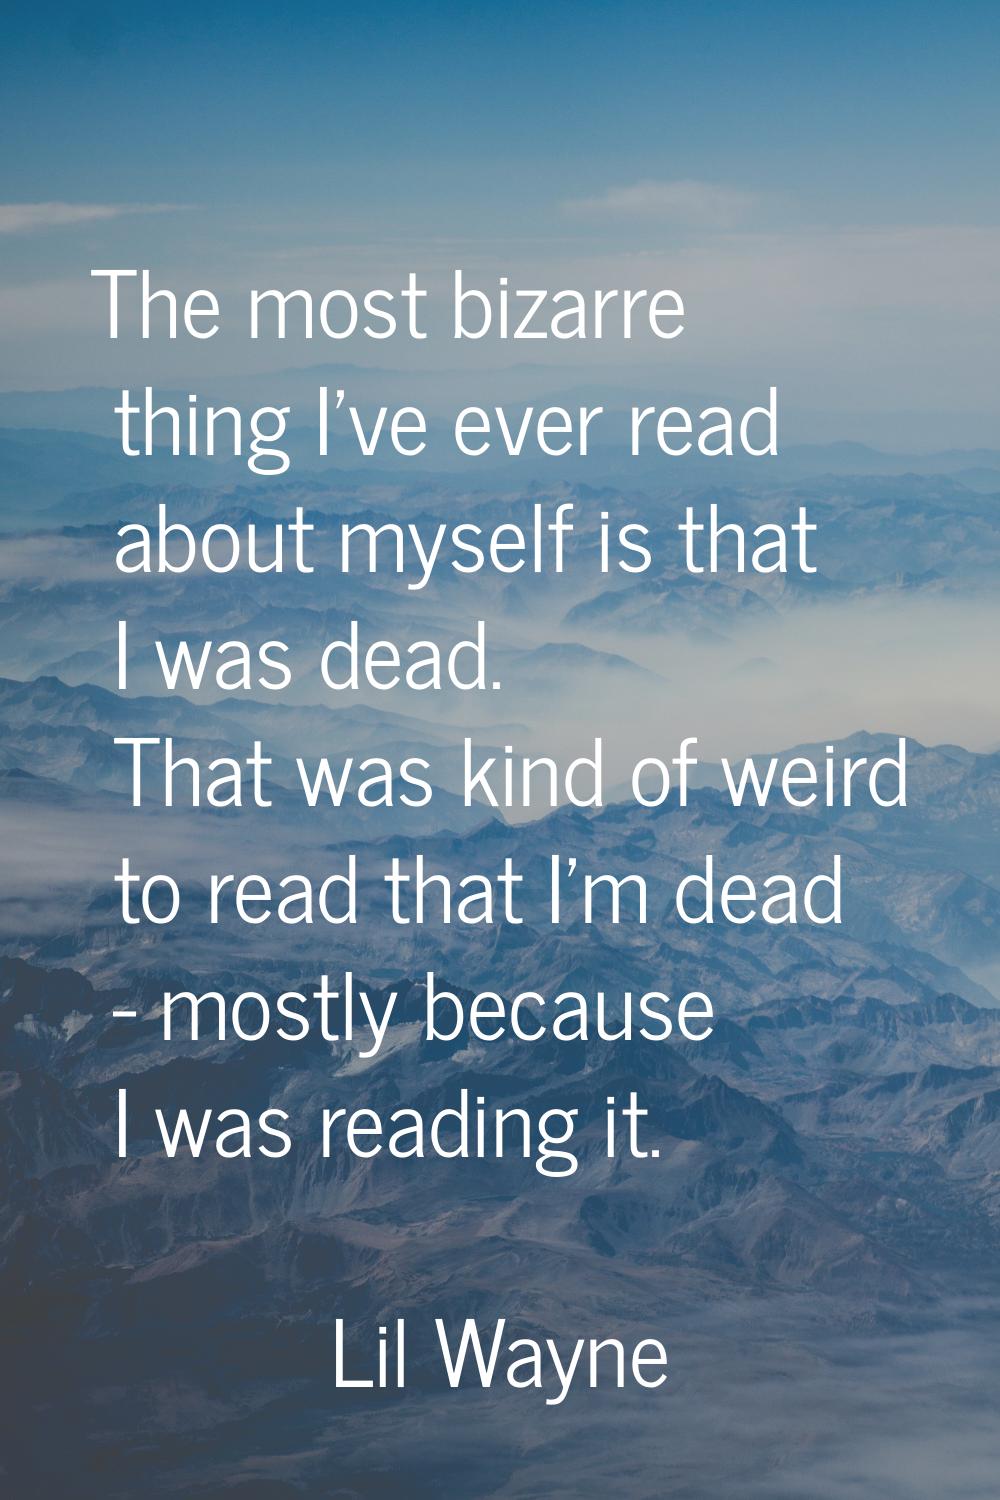 The most bizarre thing I've ever read about myself is that I was dead. That was kind of weird to re